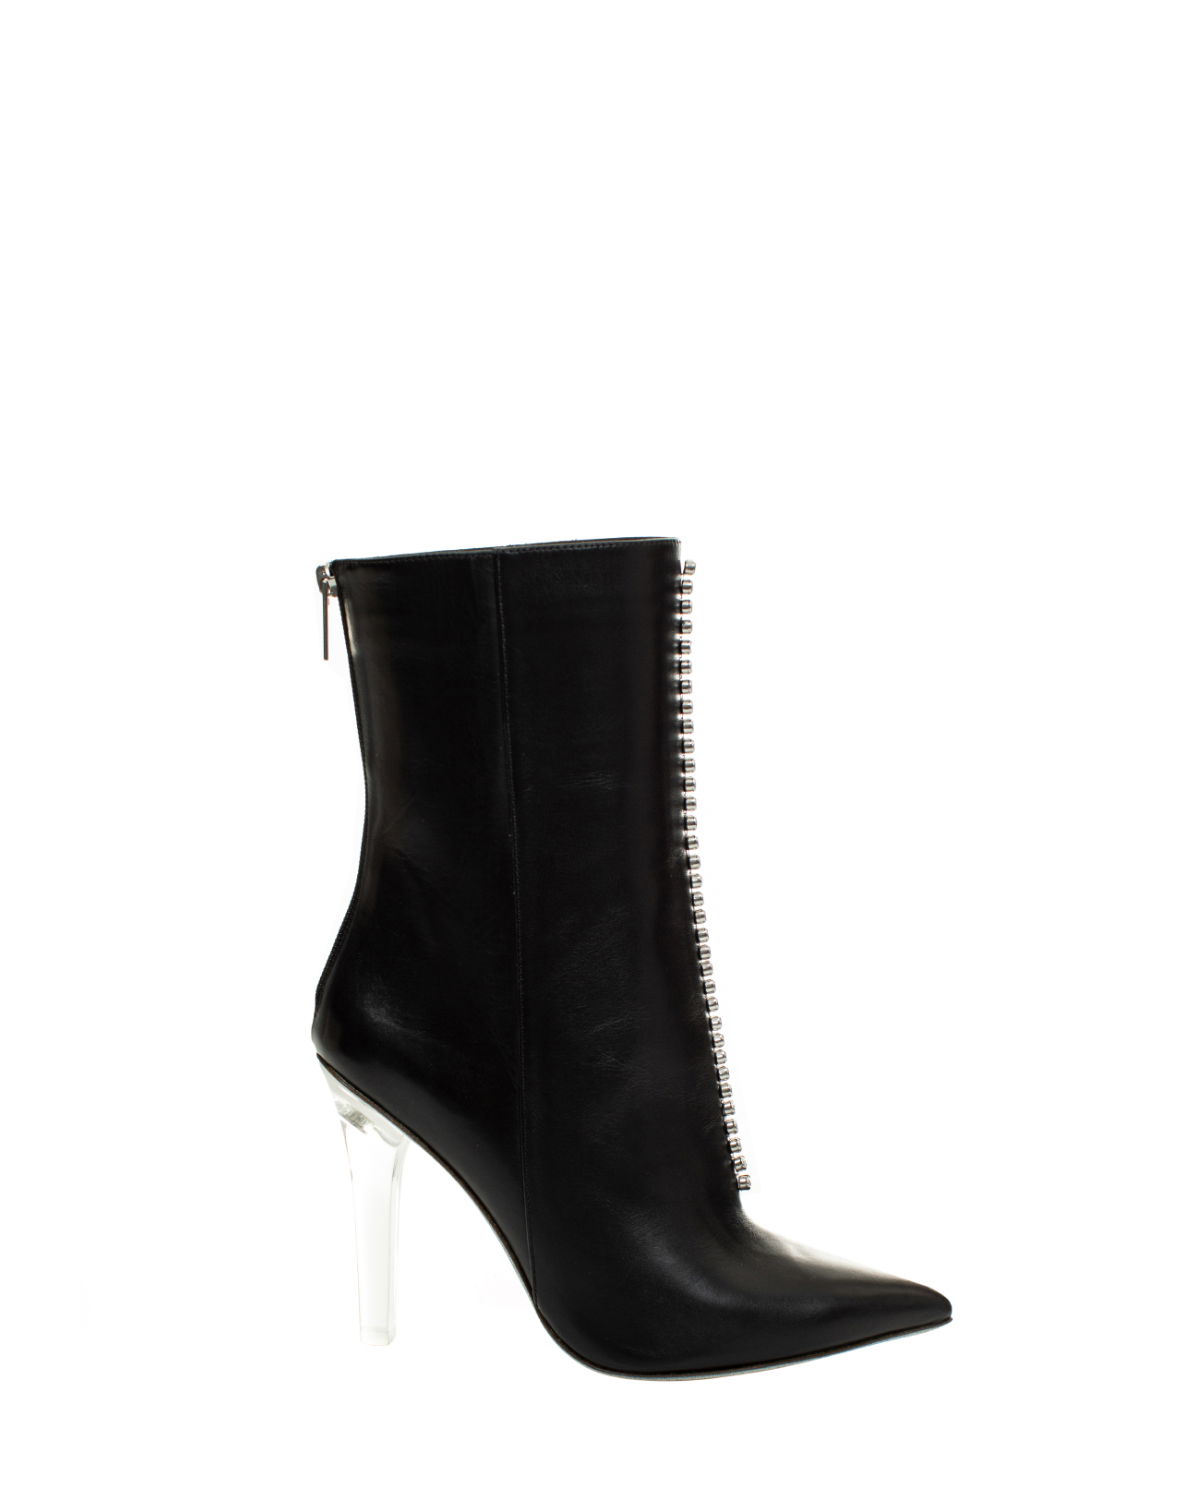 Black high boots | Sale | Genny